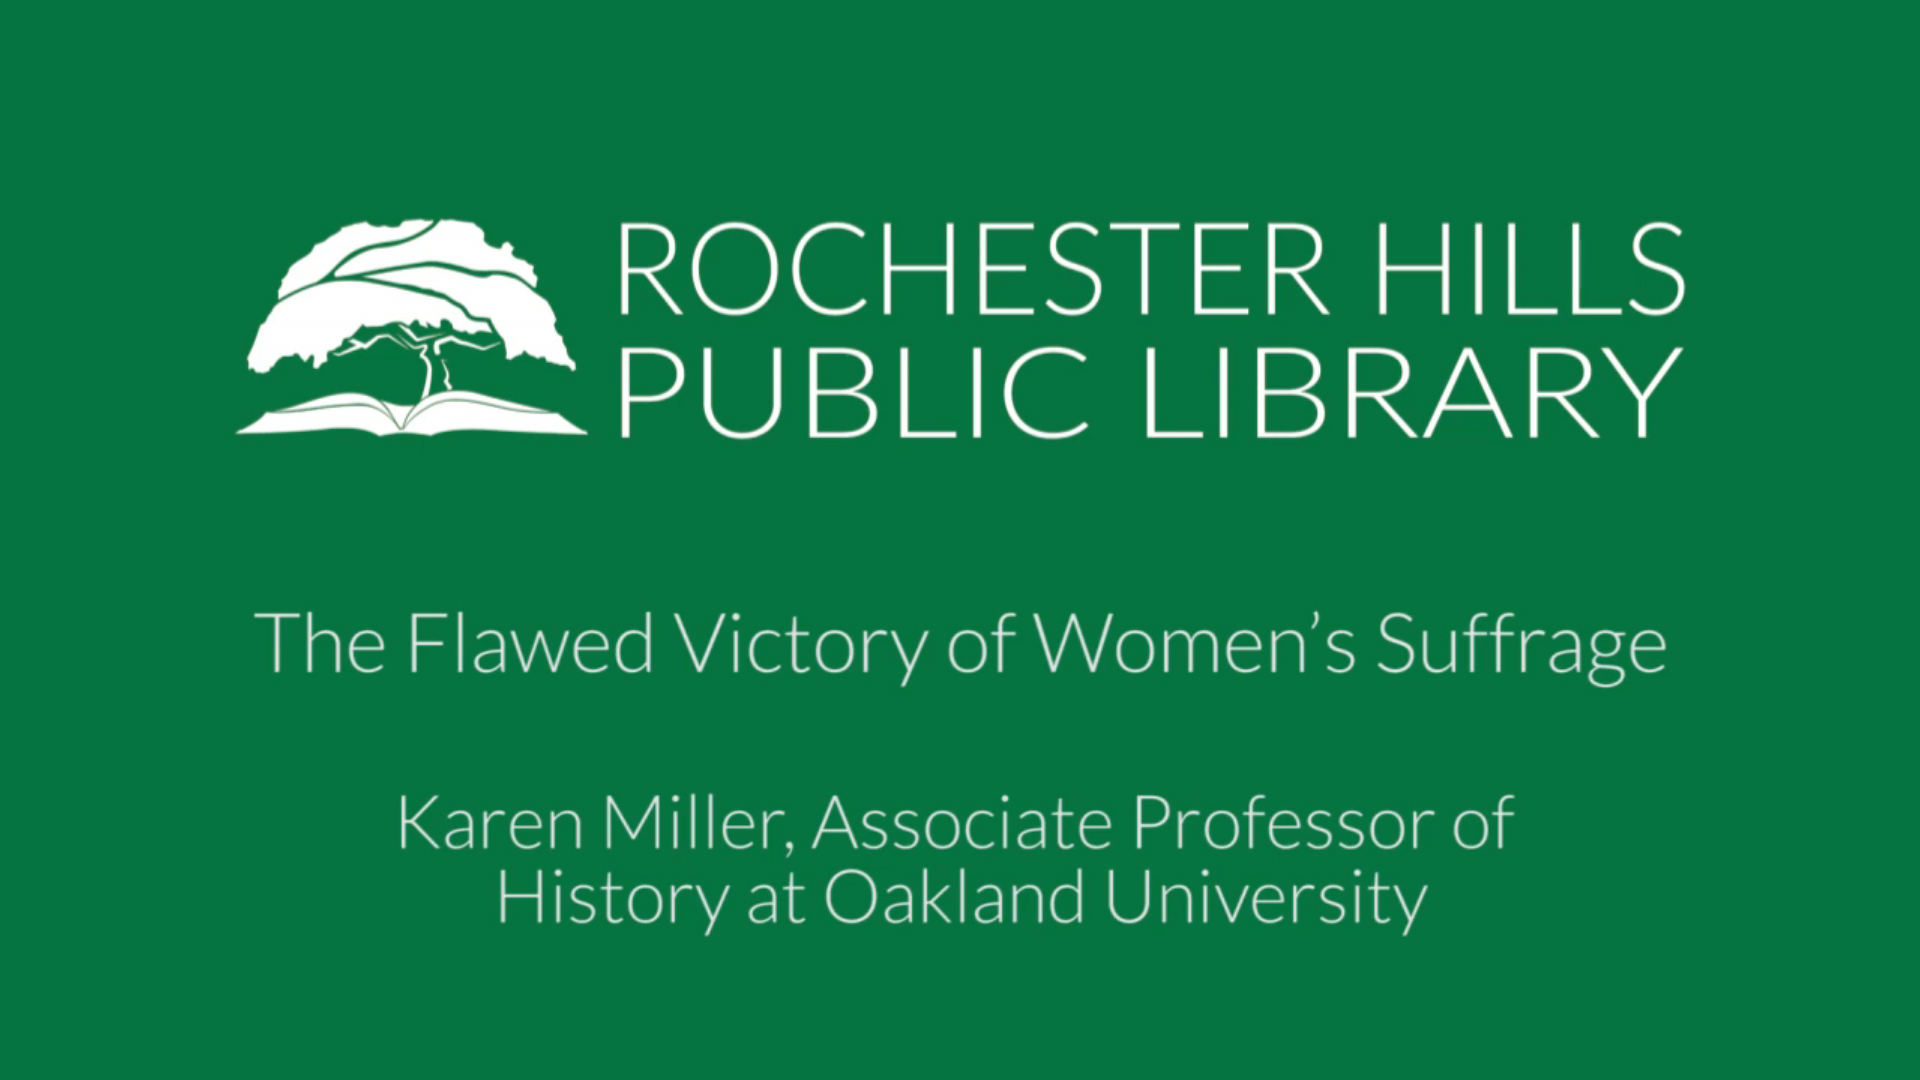 The Flawed Victory of Women's Suffrage, Presented By: Karen A.J. Miller, Sept 15, 2020